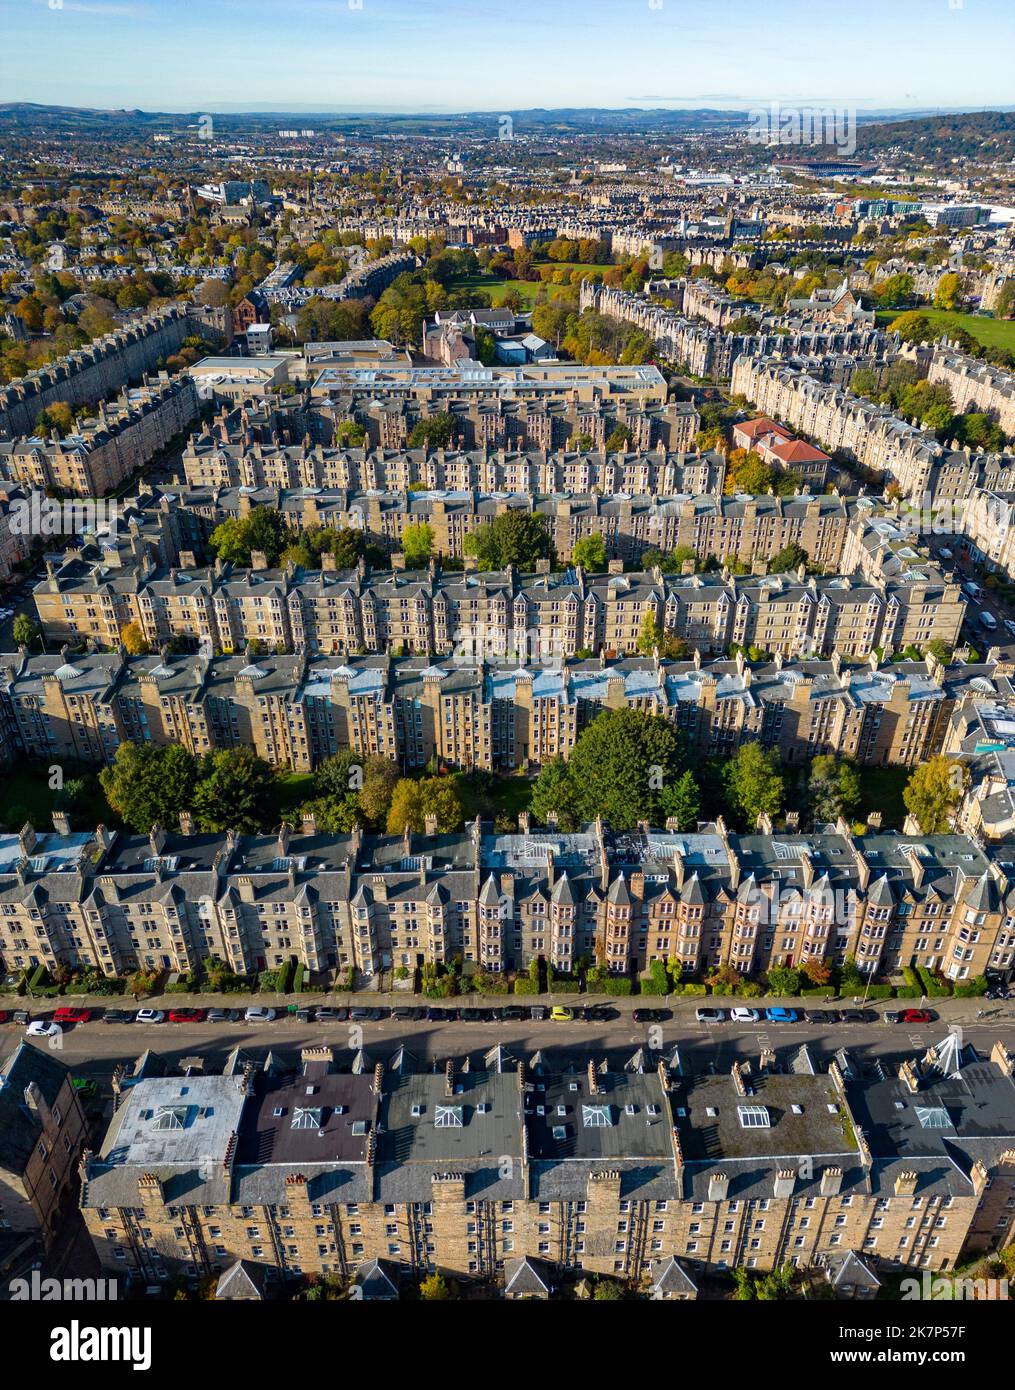 Aerial view of tenement houses in upmarket residential district of Marchmont in Edinburgh, Scotland, UK Stock Photo